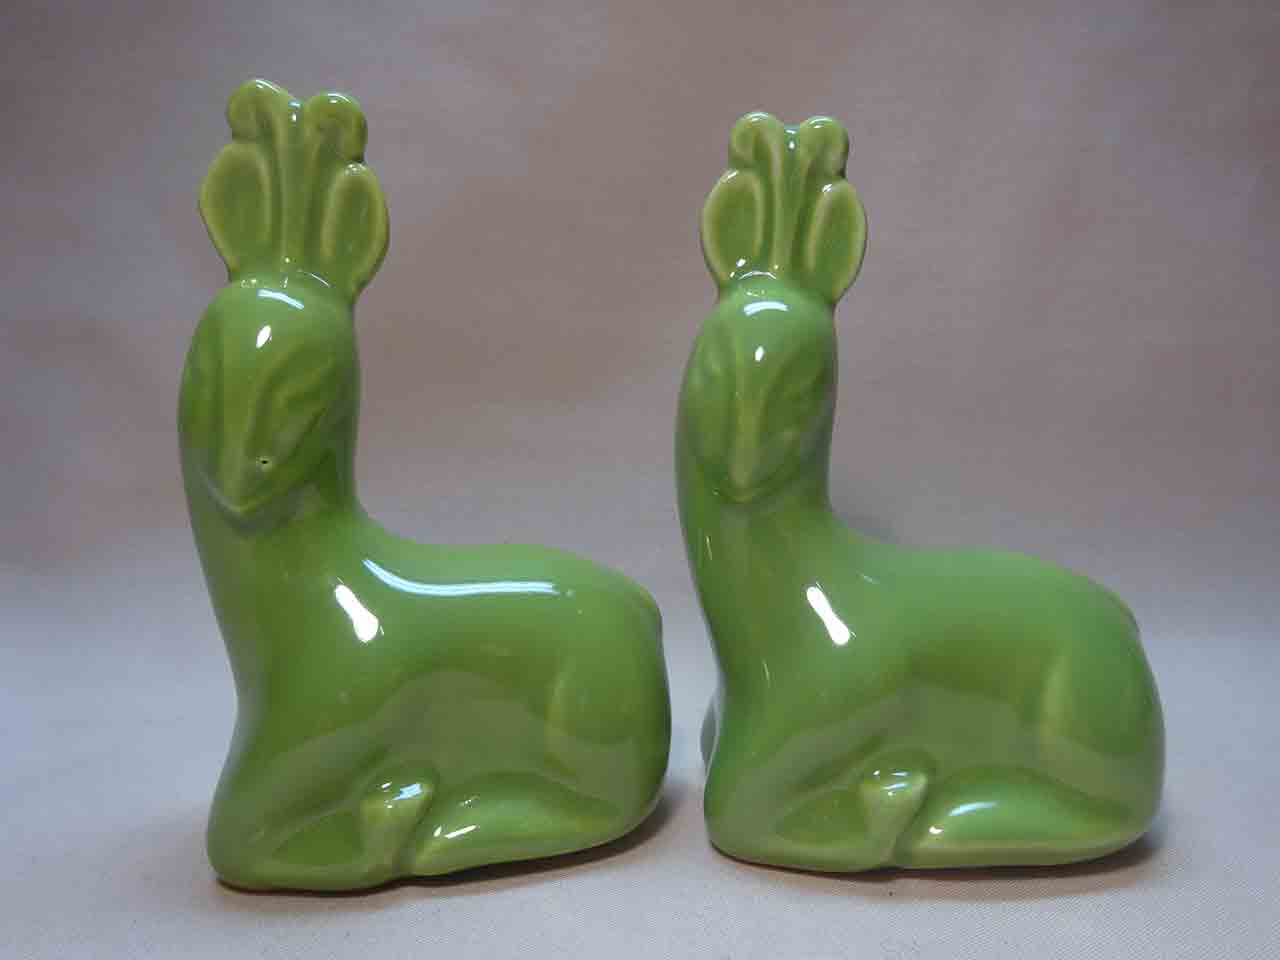 Pacific Pottery salt and pepper shakers - deer